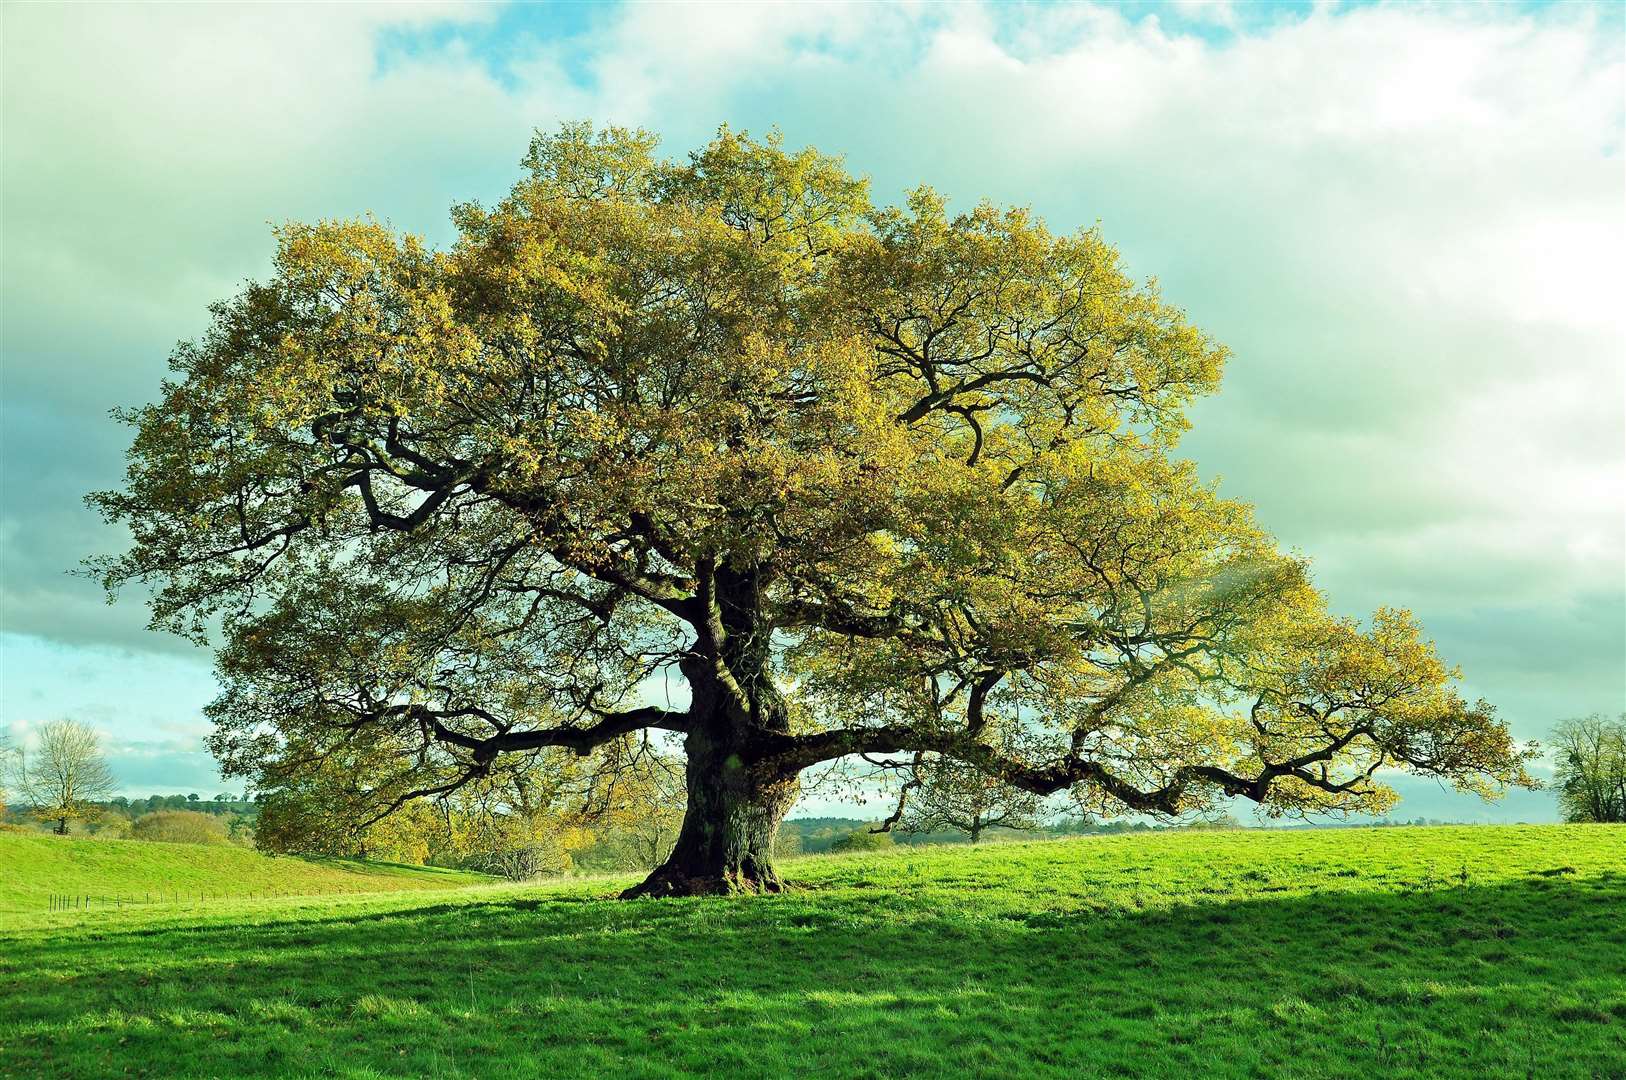 Trees are glorious in open spaces but those with them near property should seek advice, say surveyors. Photo: Shutterstock stock image